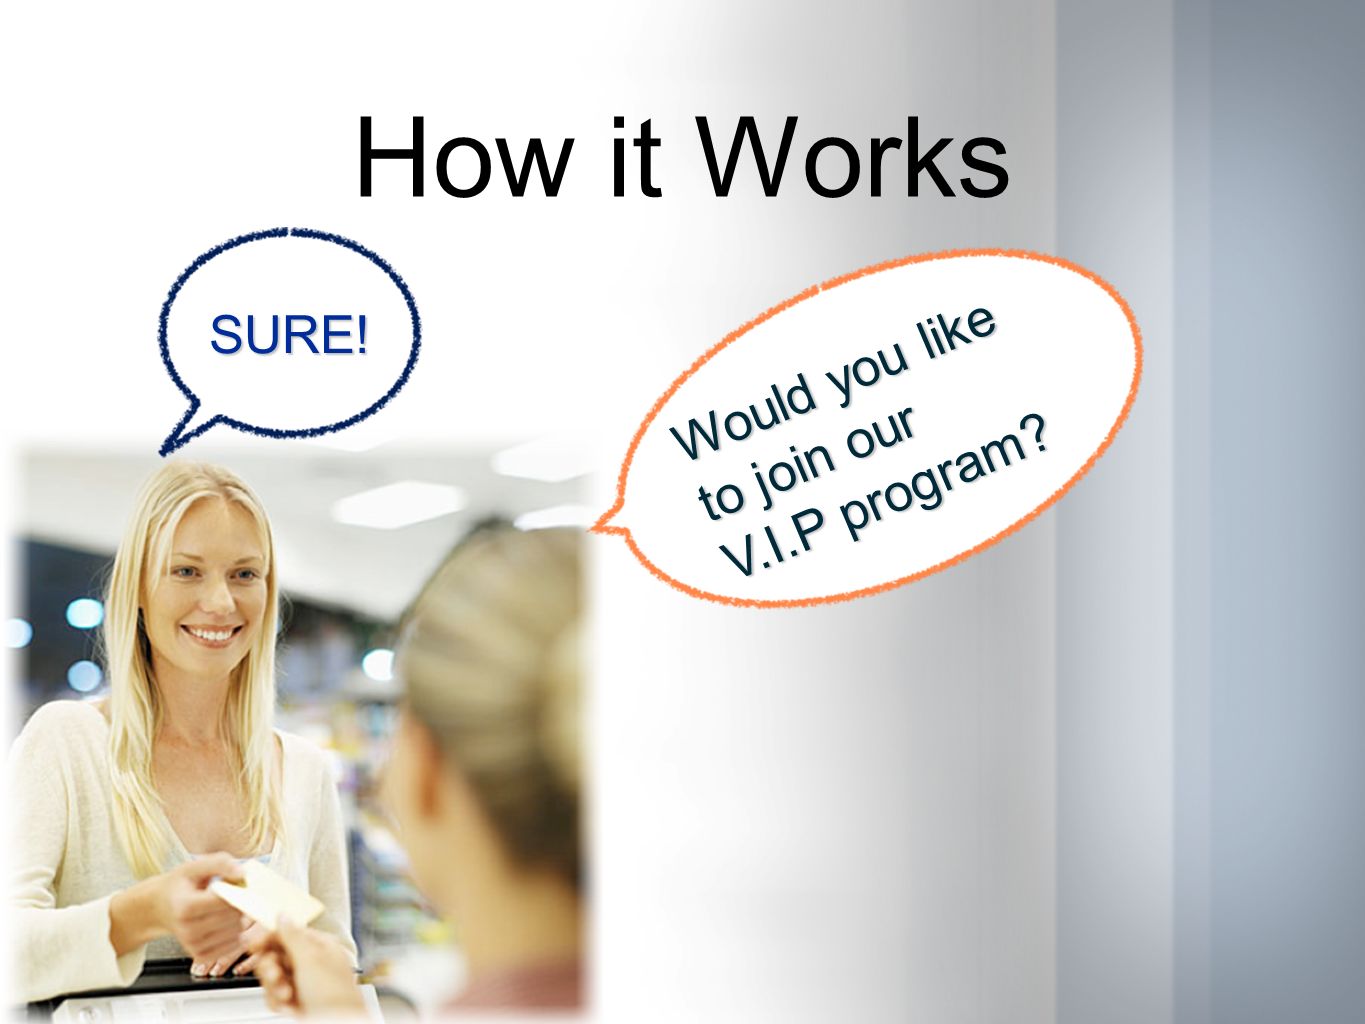 How it Works Would you like to join our V.I.P program SURE!